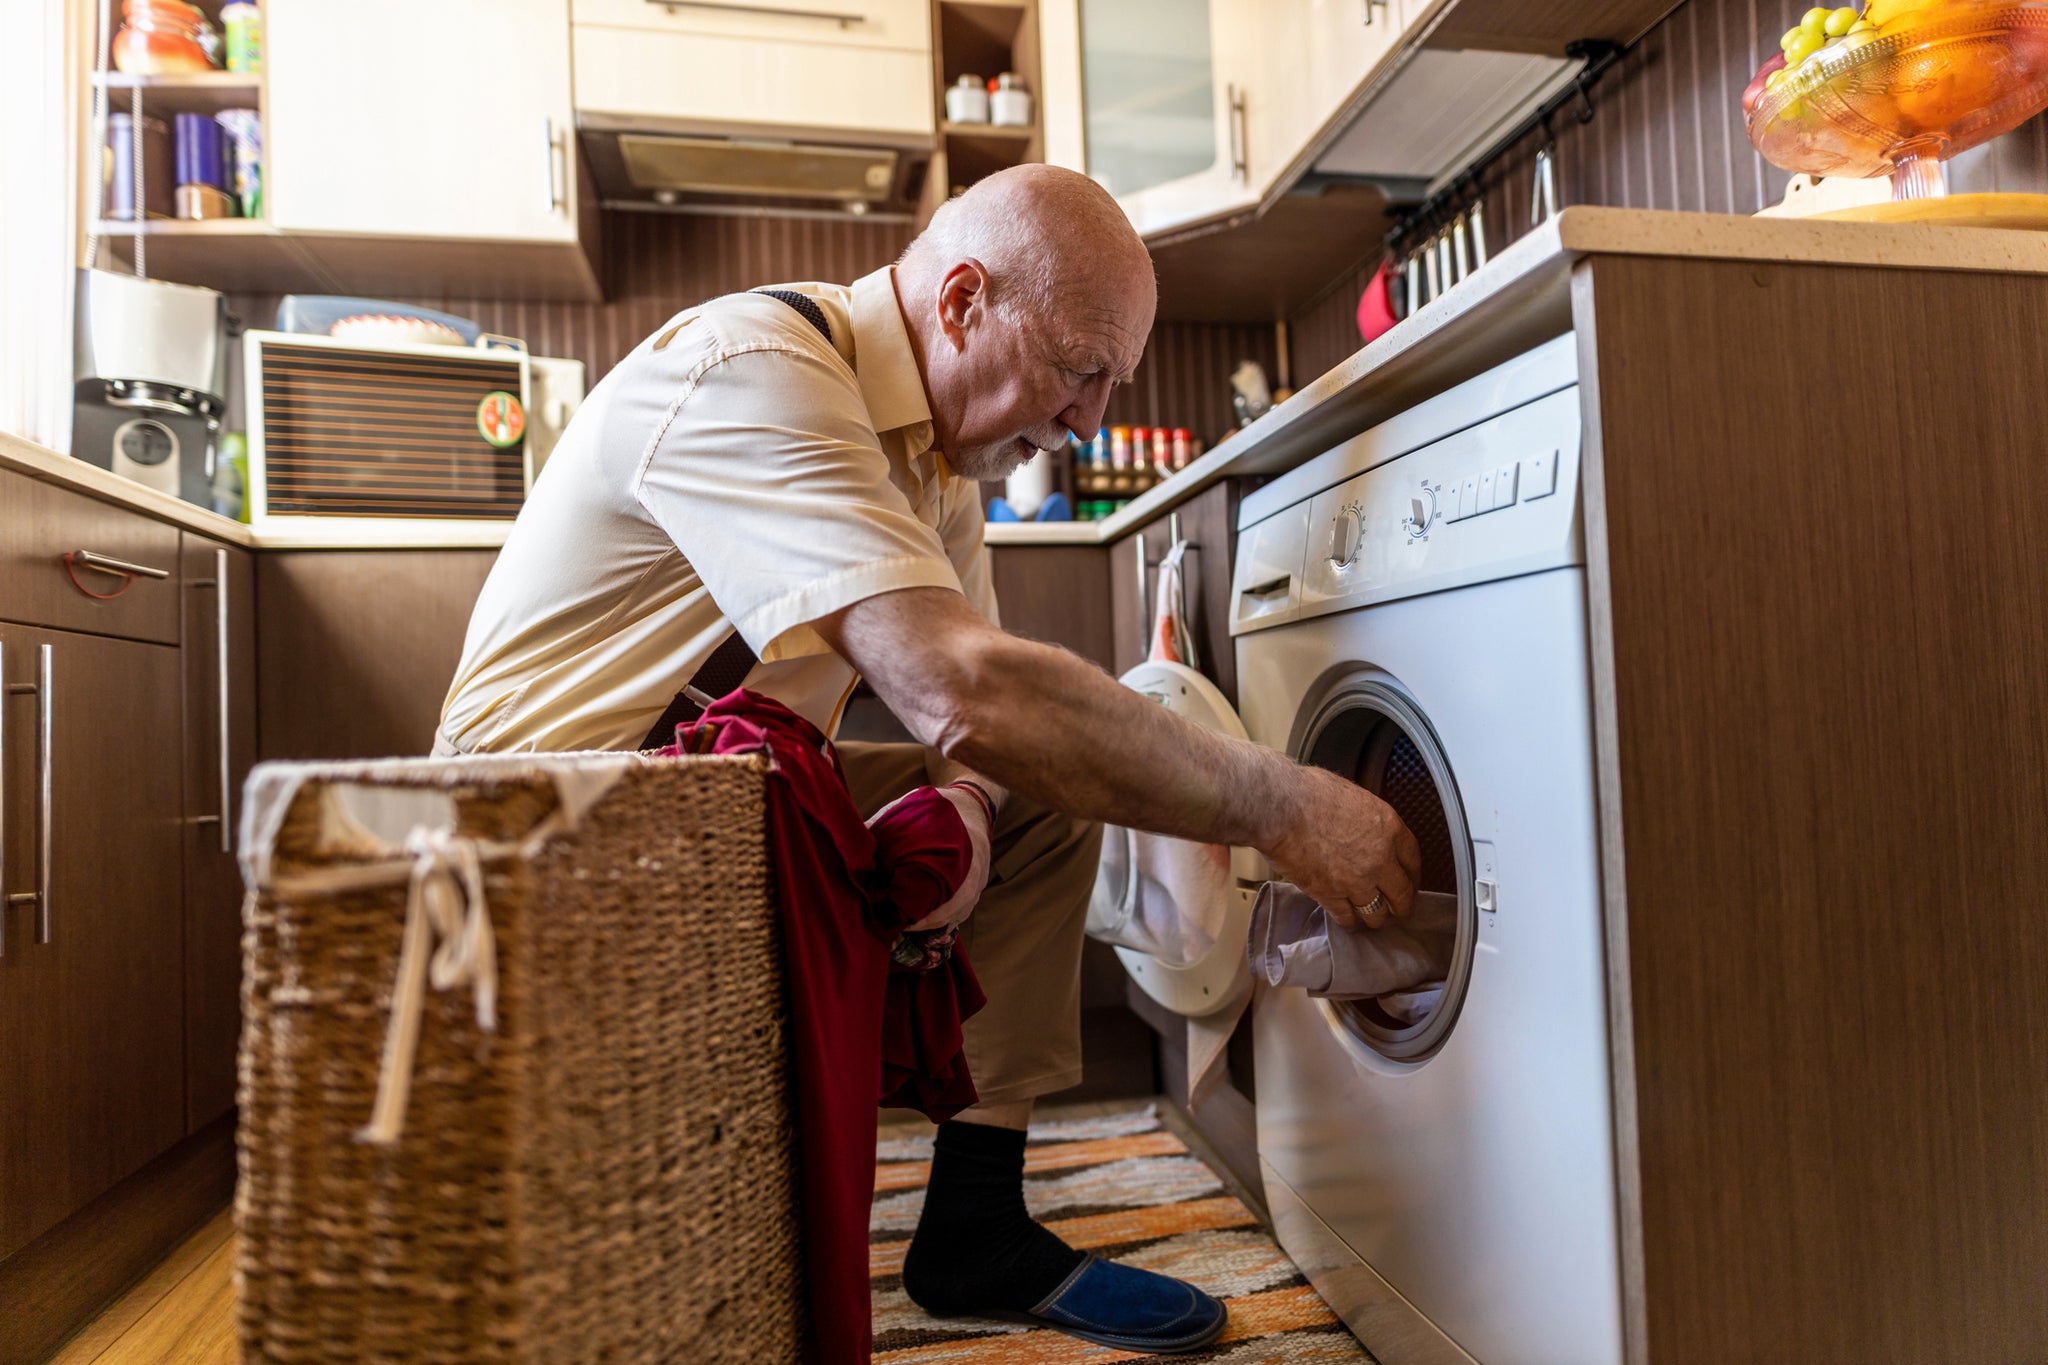 A man does laundry.